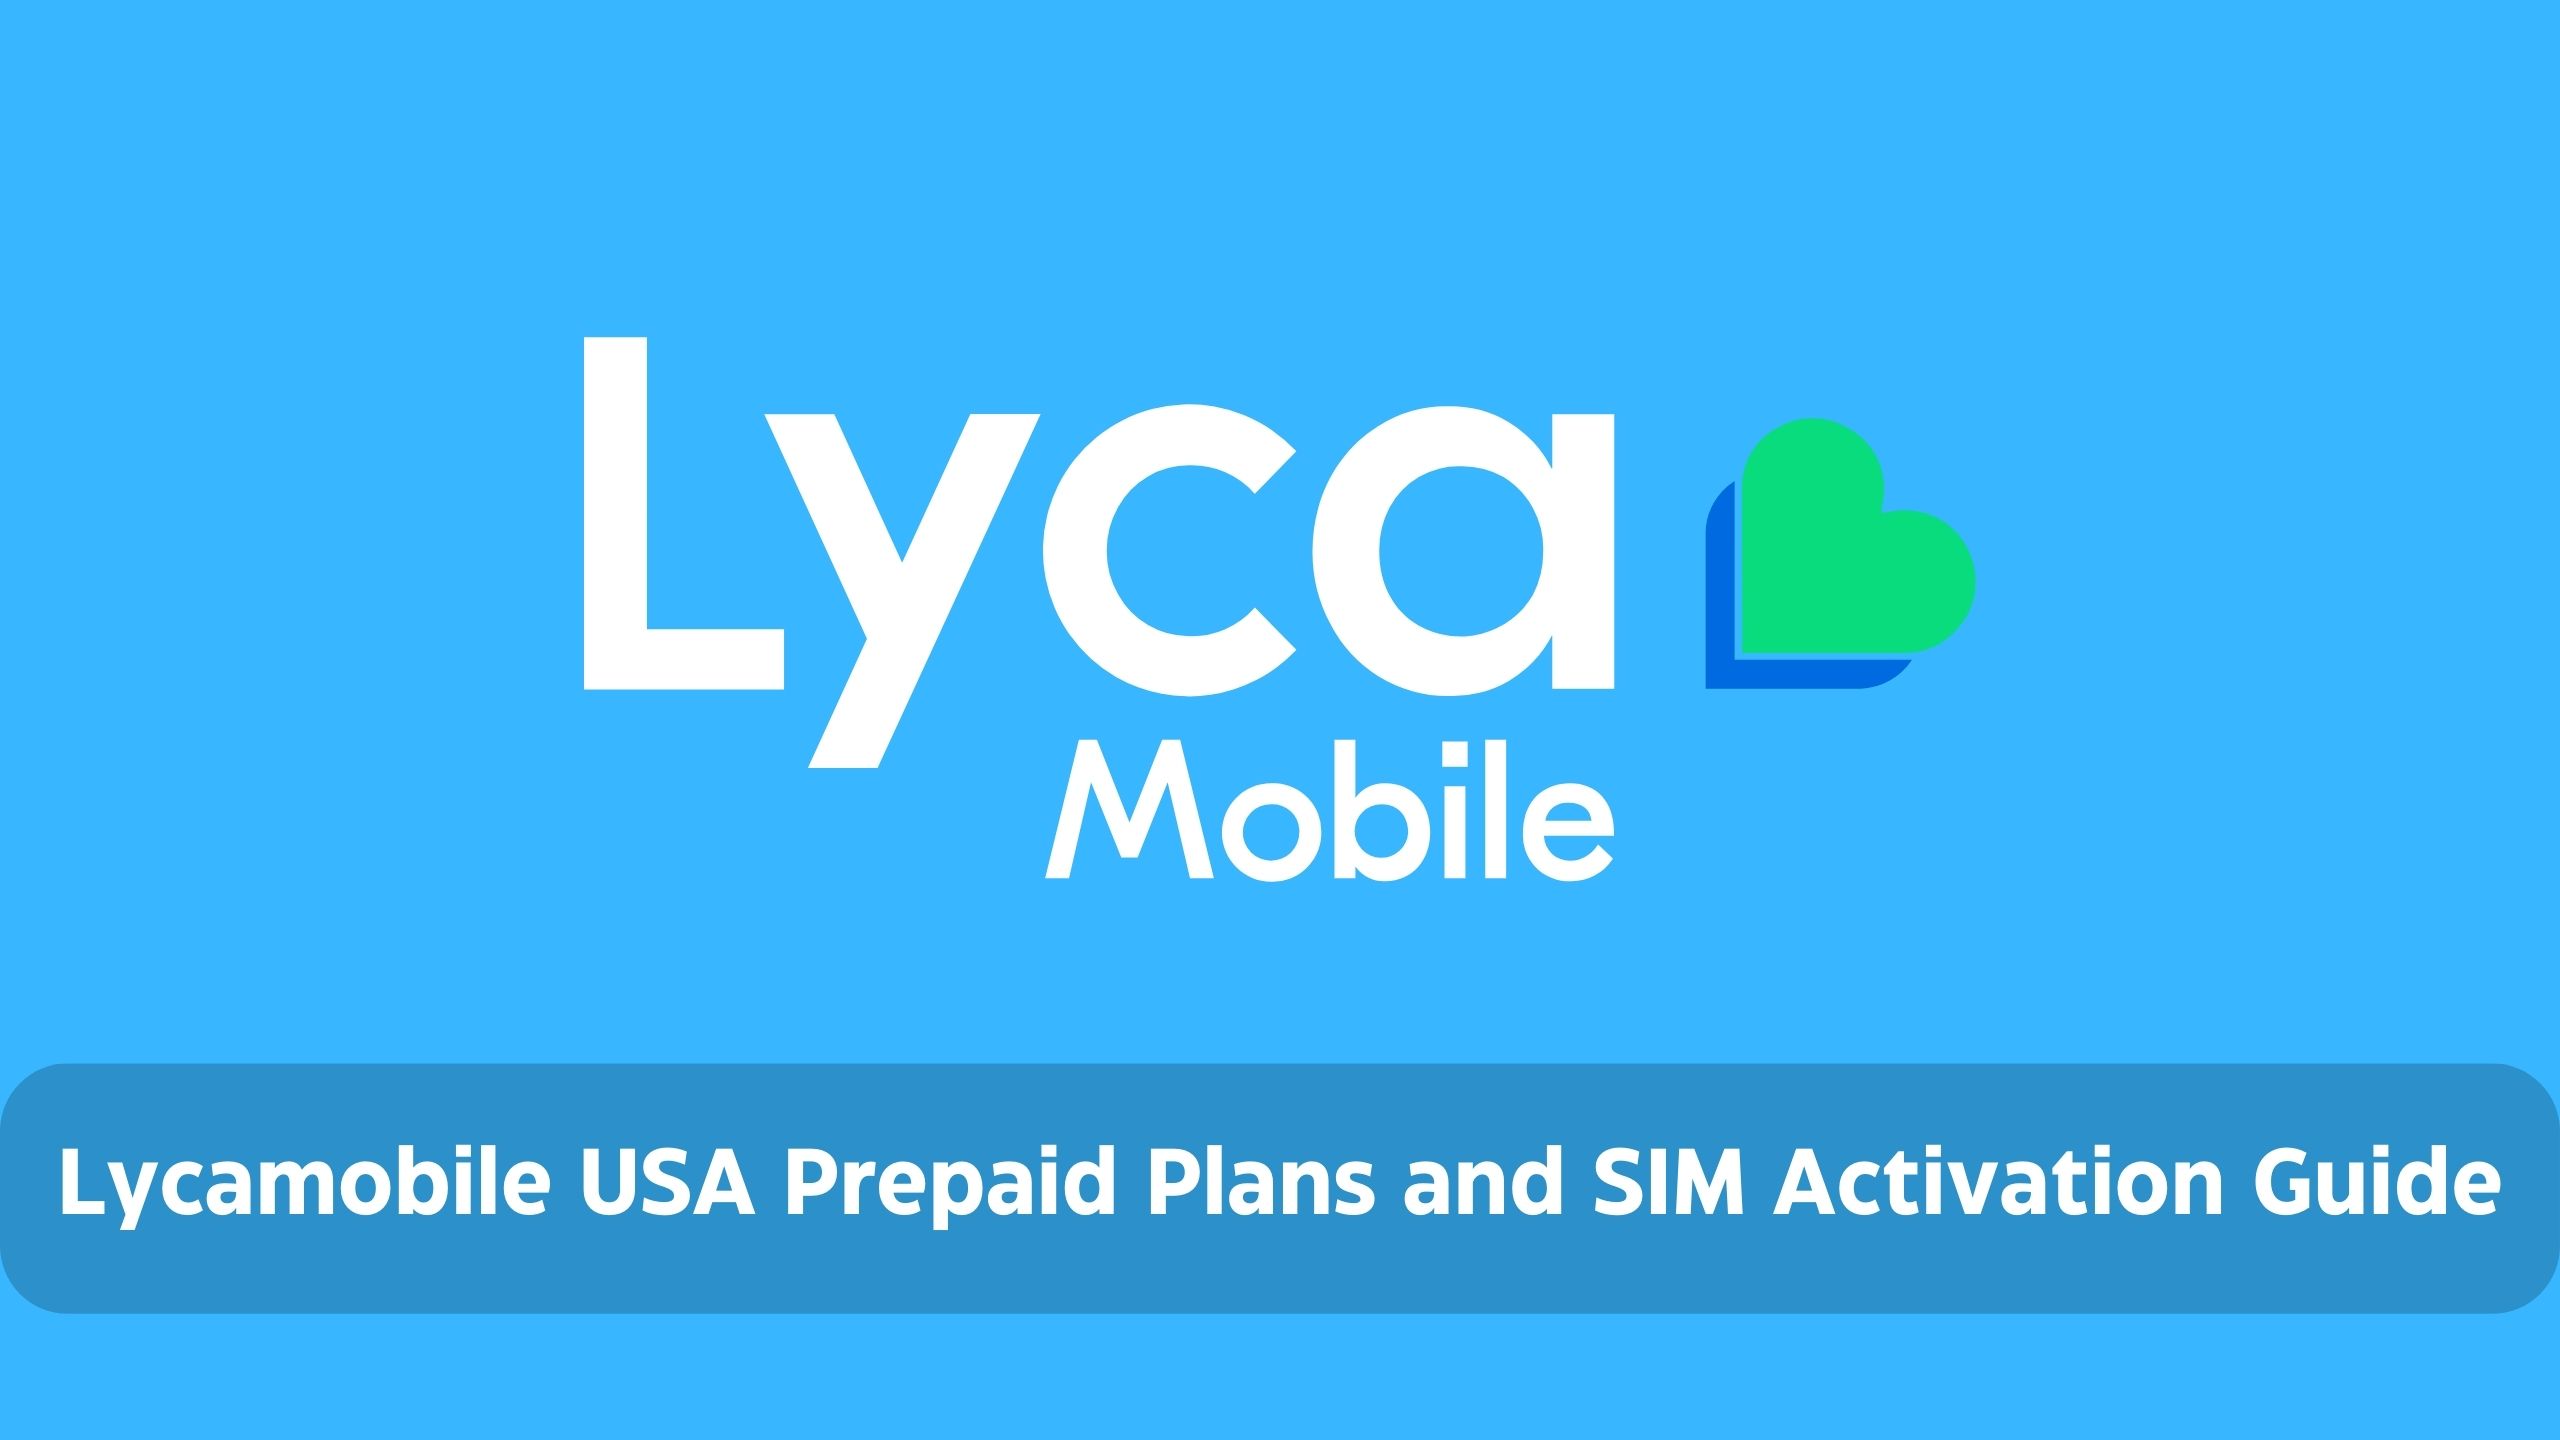 Lycamobile USA Prepaid Plans, Top Up and SIM Activation Guide | Monthly, International & Family Plan, Recharge, $19 Plan